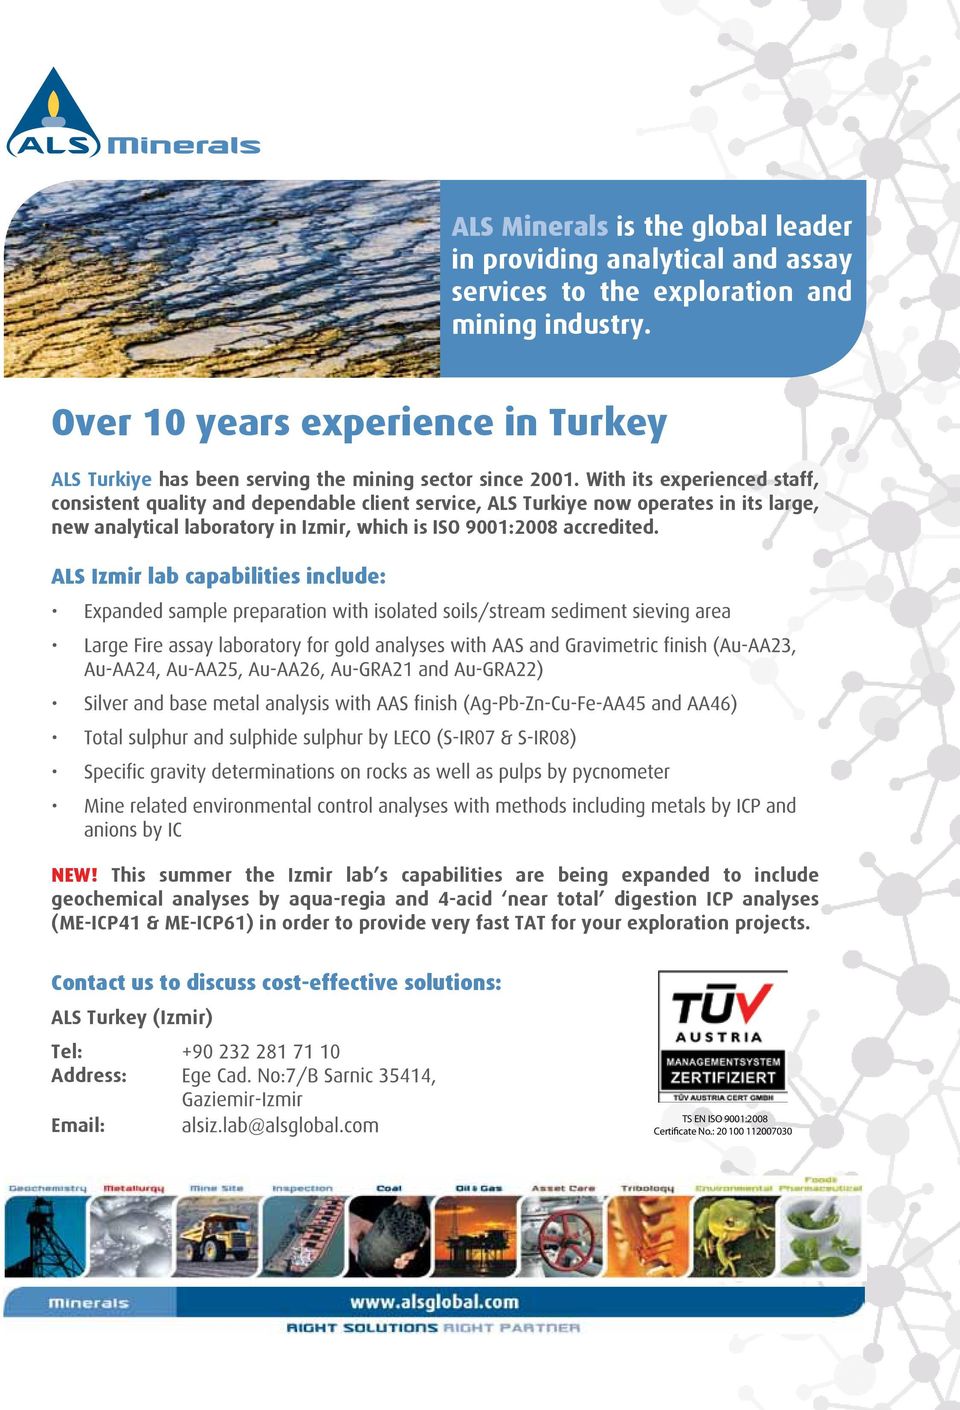 With its experienced staff, consistent quality and dependable client service, ALS Turkiye now operates in its large, new analytical laboratory in Izmir, which is ISO 9001:2008 accredited.